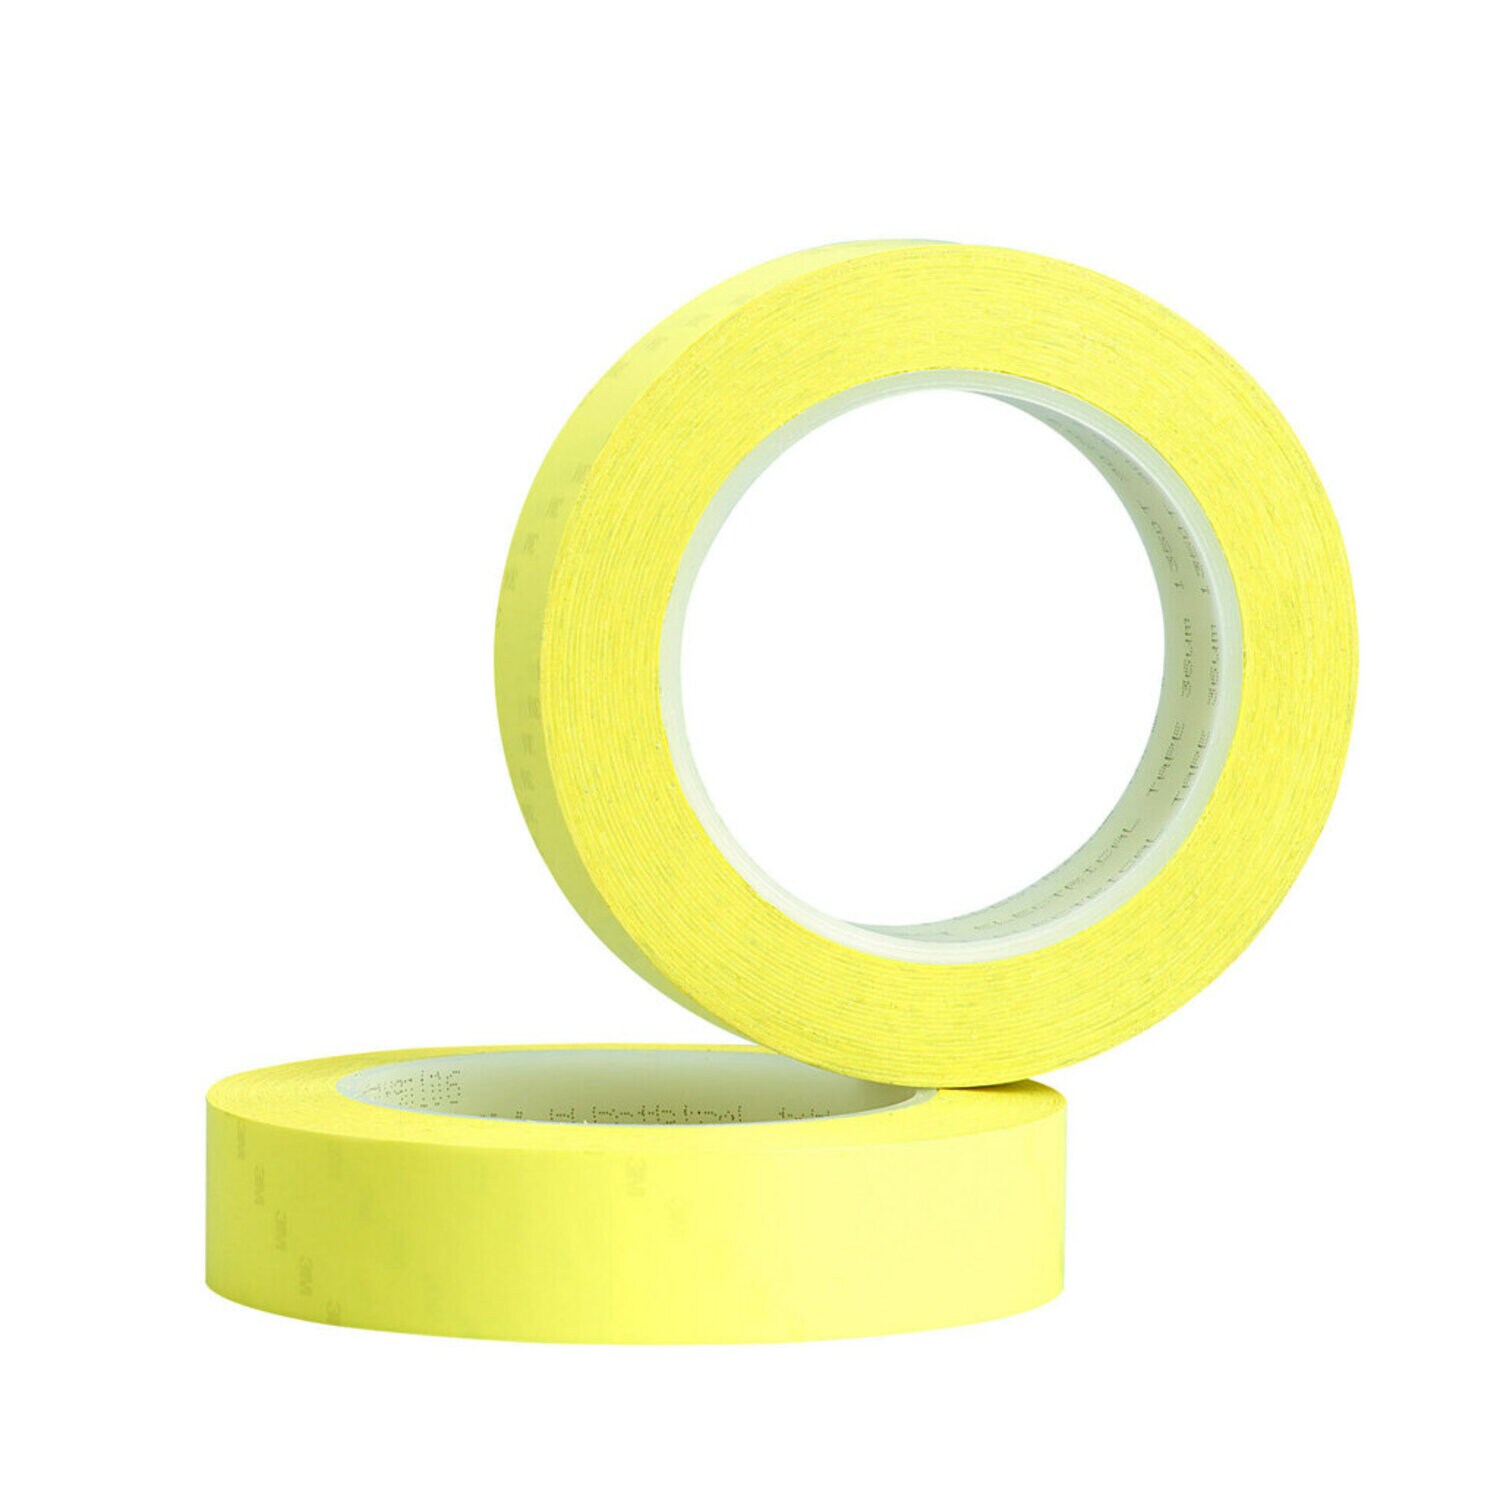 7010045331 - 3M Polyester Film Electrical Tape 74, 1/4 in x 72 yd, Yellow, 144
Rolls/Case